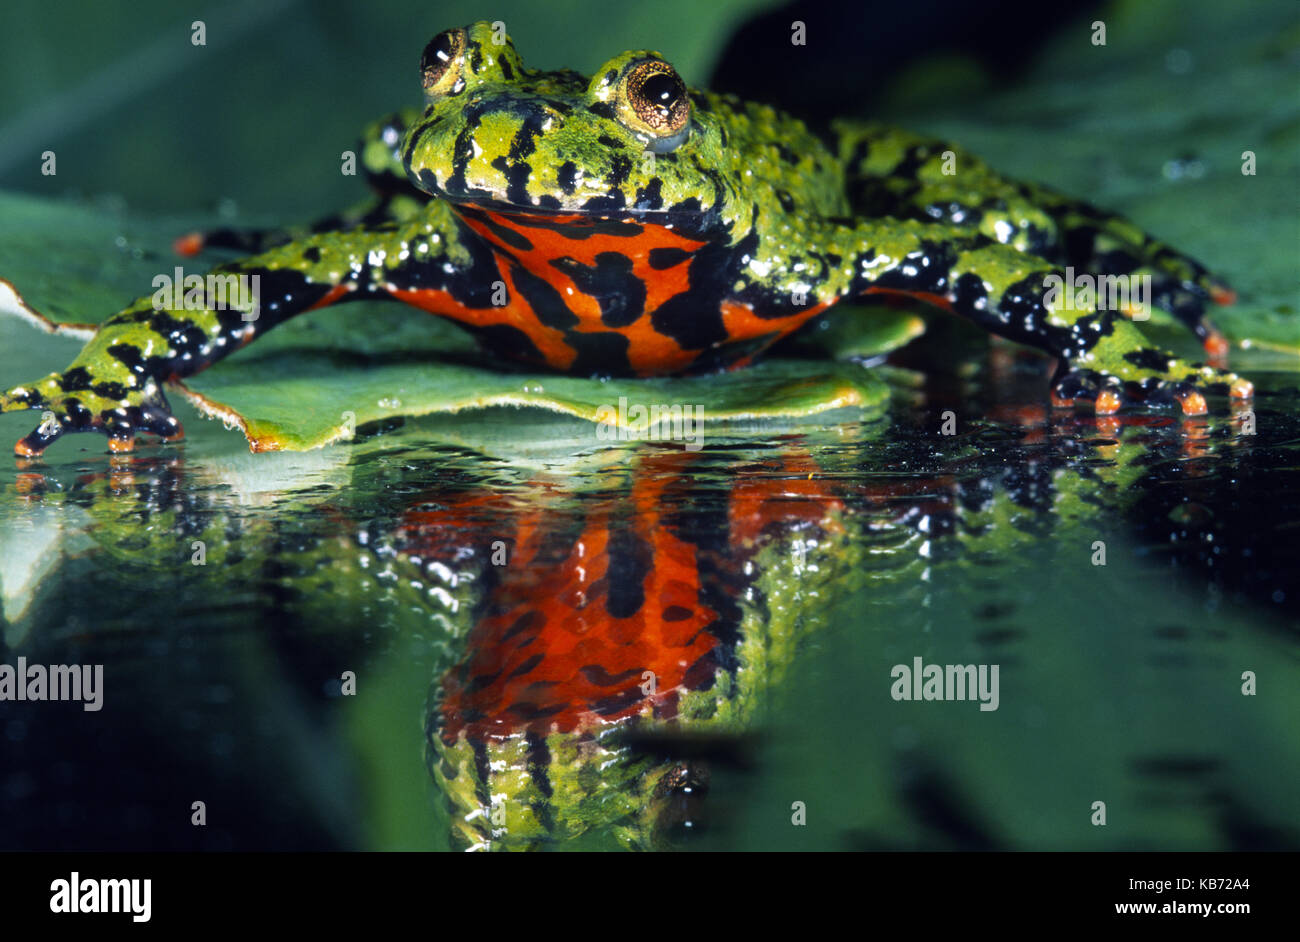 Oriental Fire-bellied Toad (Bombina orientalis) resting on a water lily leaf, Belgium Stock Photo